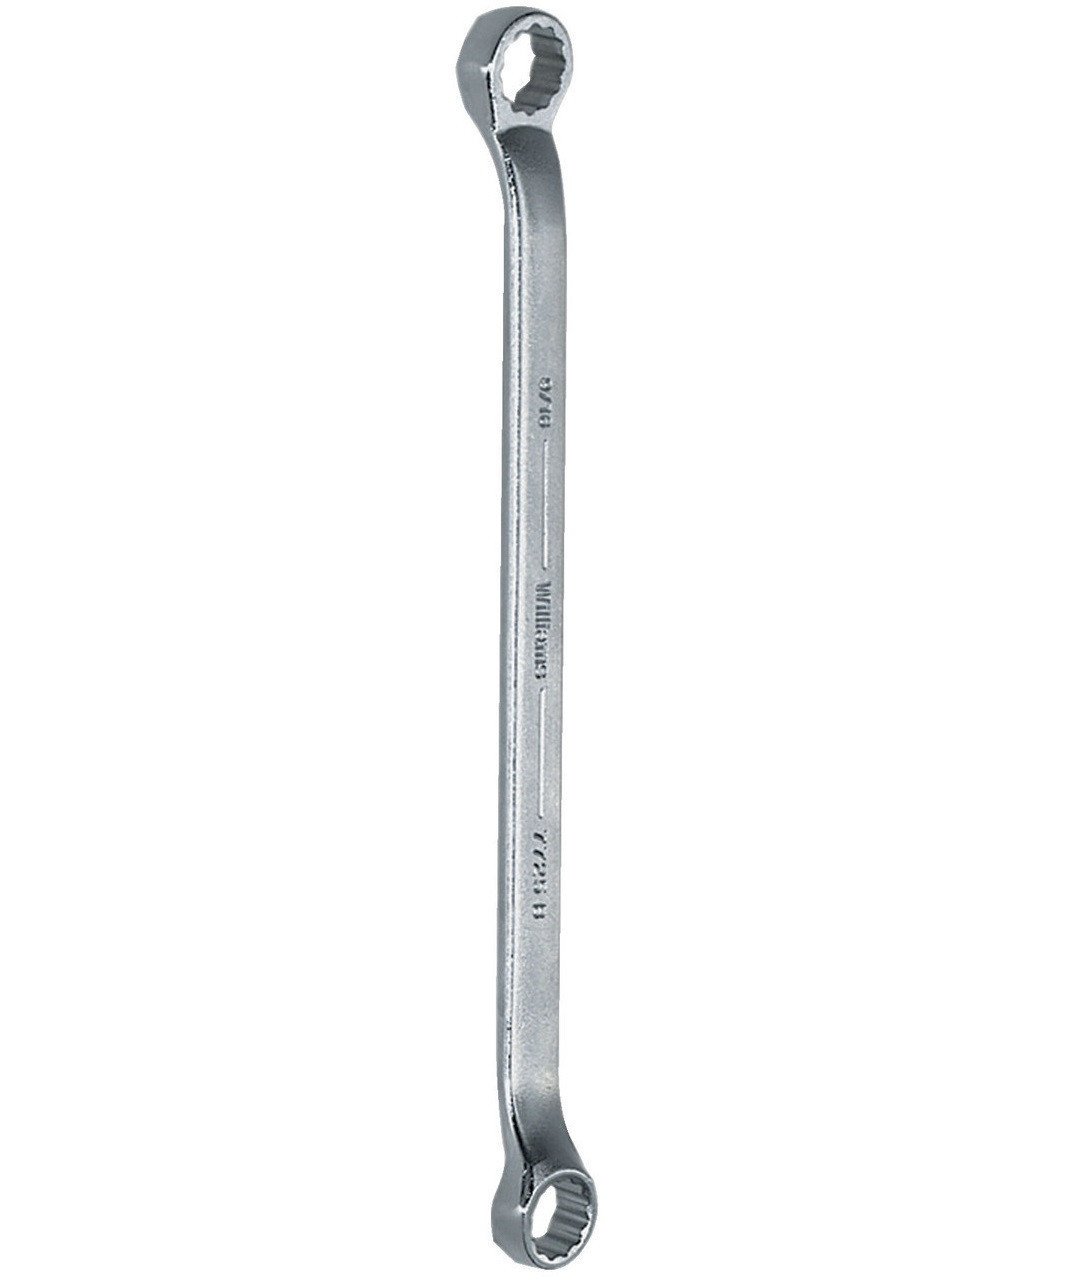 10x11MM Williams Satin Chrome Double Head 10 Degree Offset Box End Wrench 12 PT - JHWBWM-1011